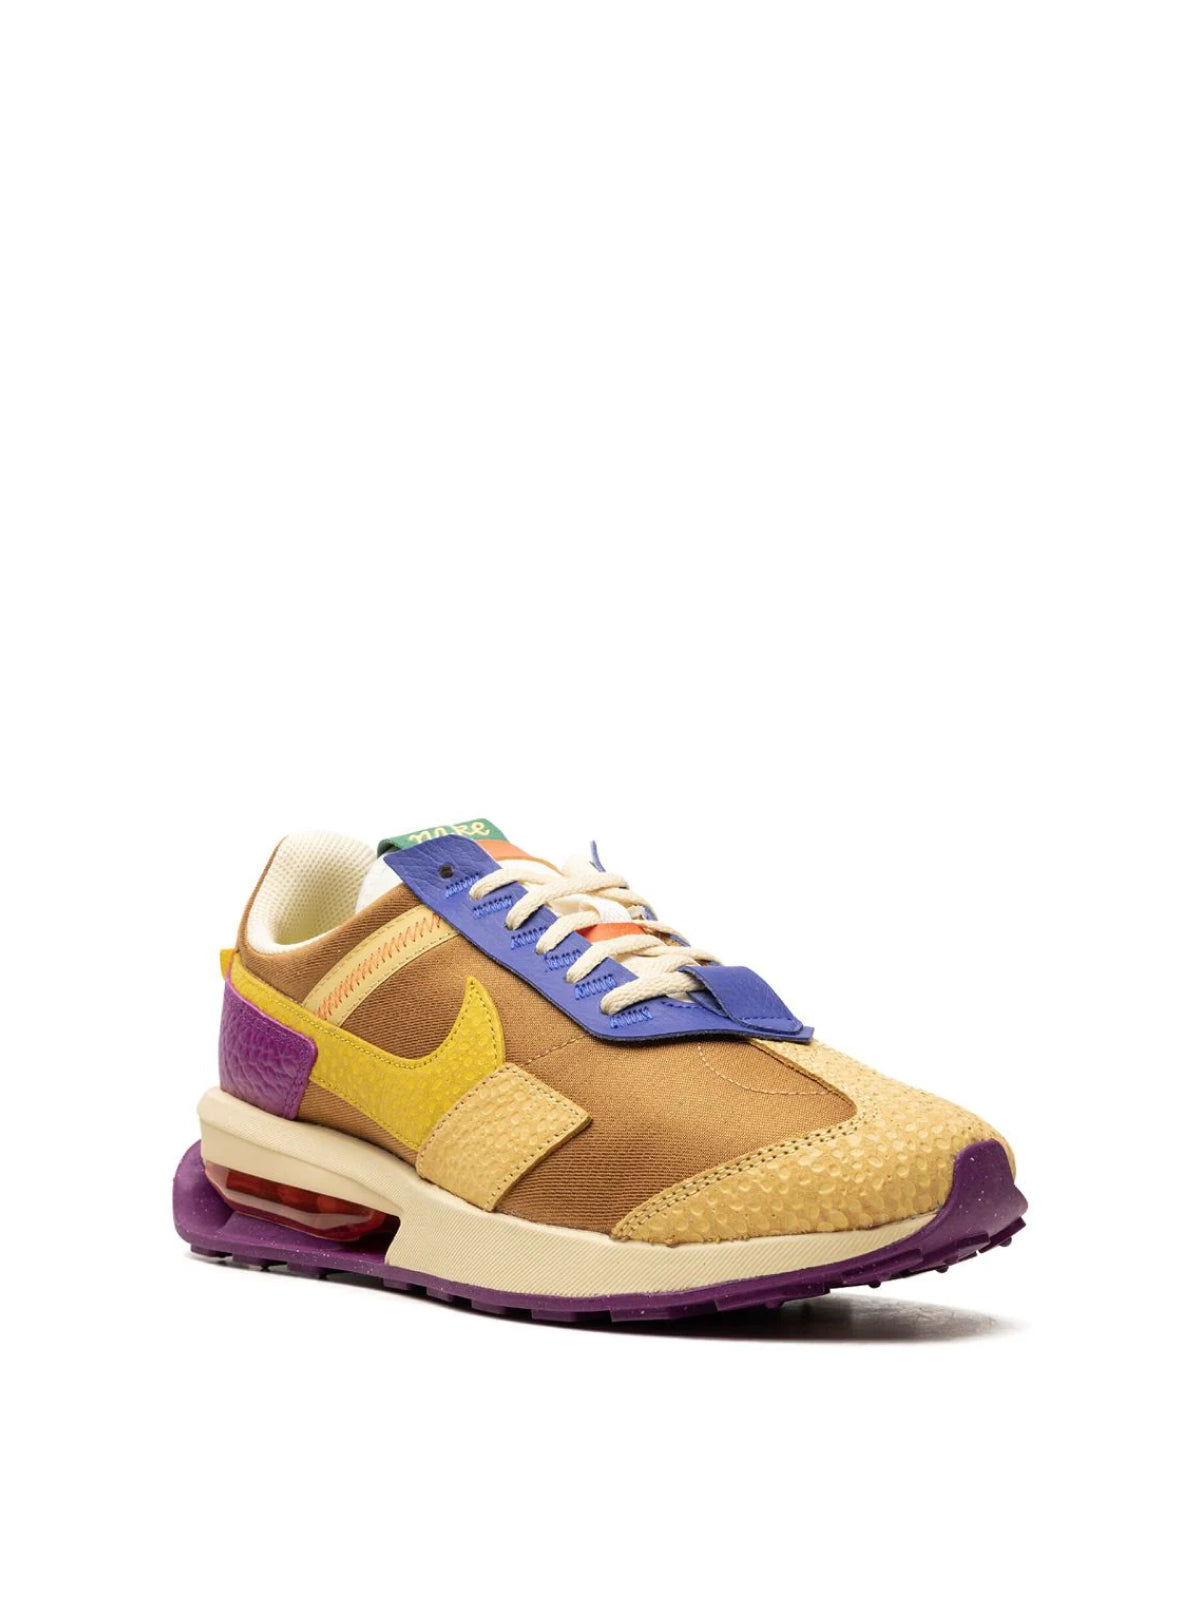 Nike-OUTLET-SALE-Air Max Pre Day Optimism Sneakers-ARCHIVIST